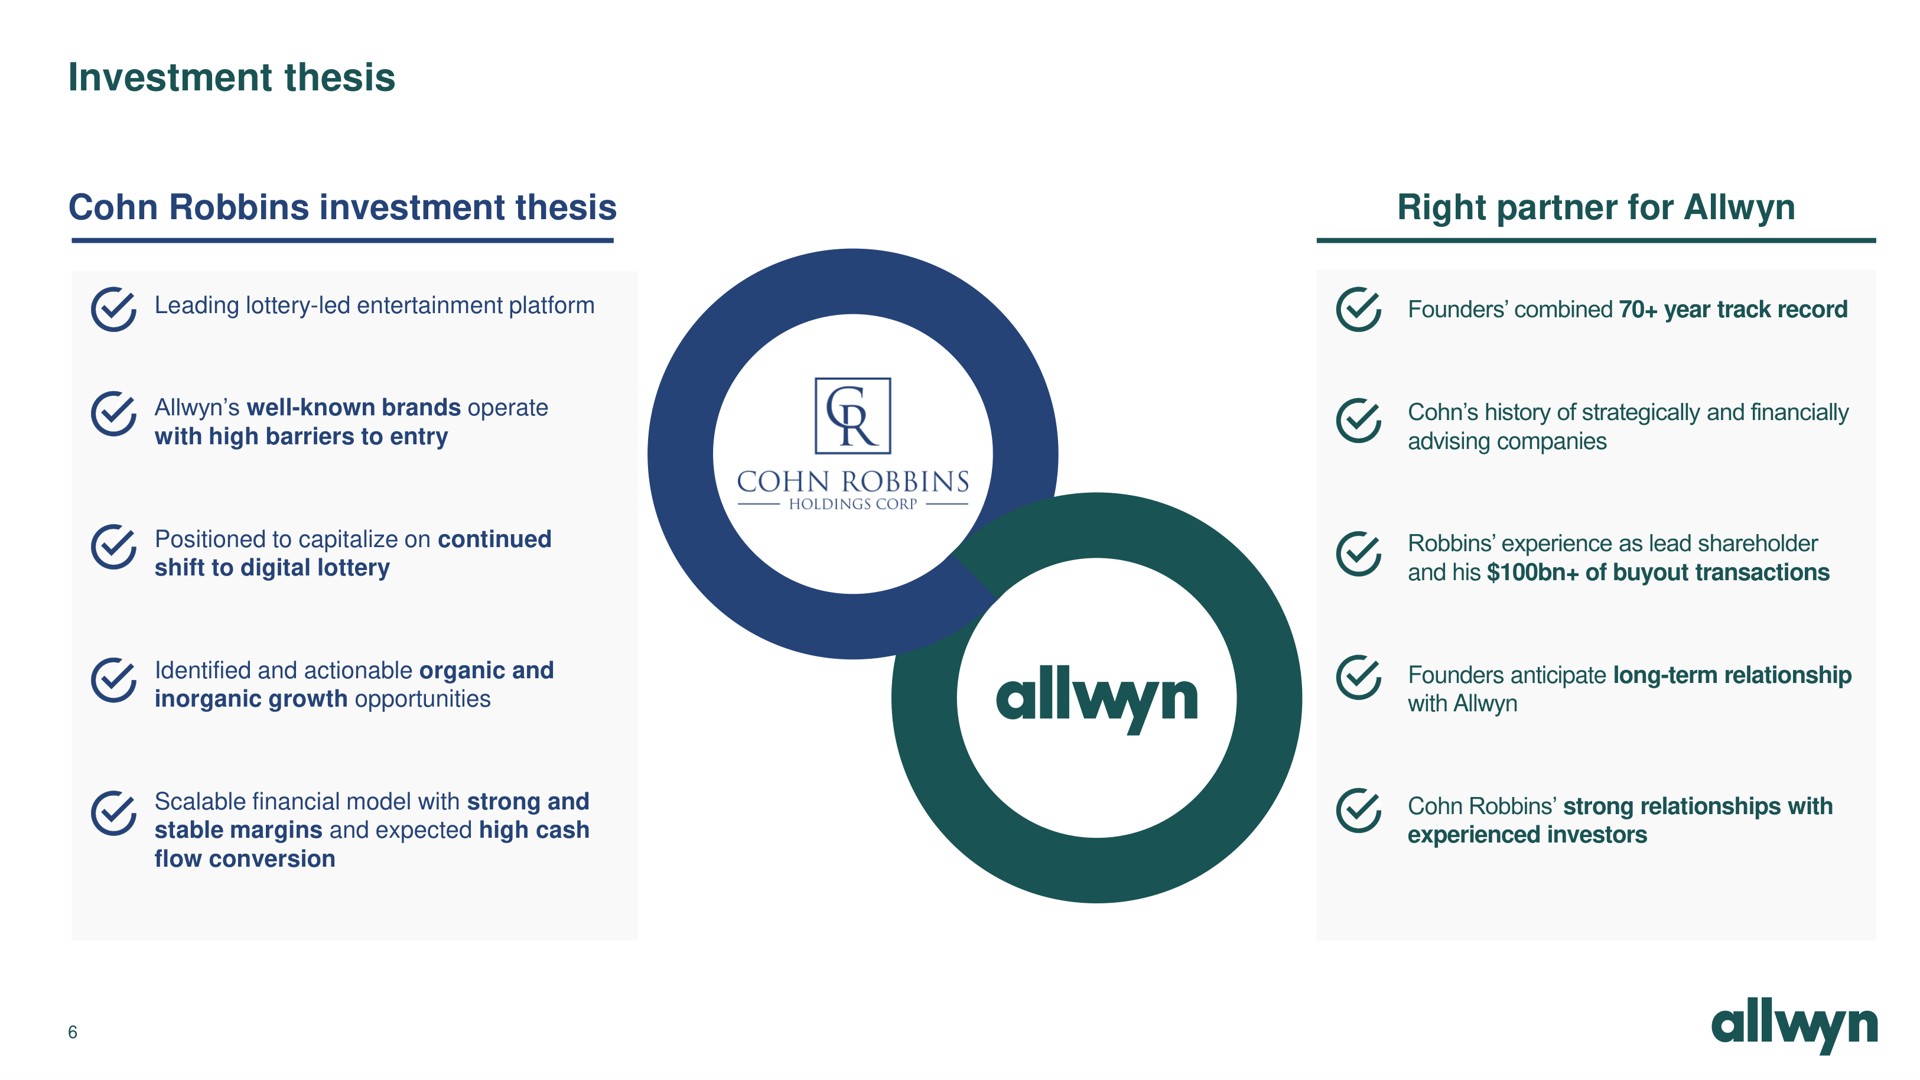 investment thesis investment thesis right partner for | Allwyn